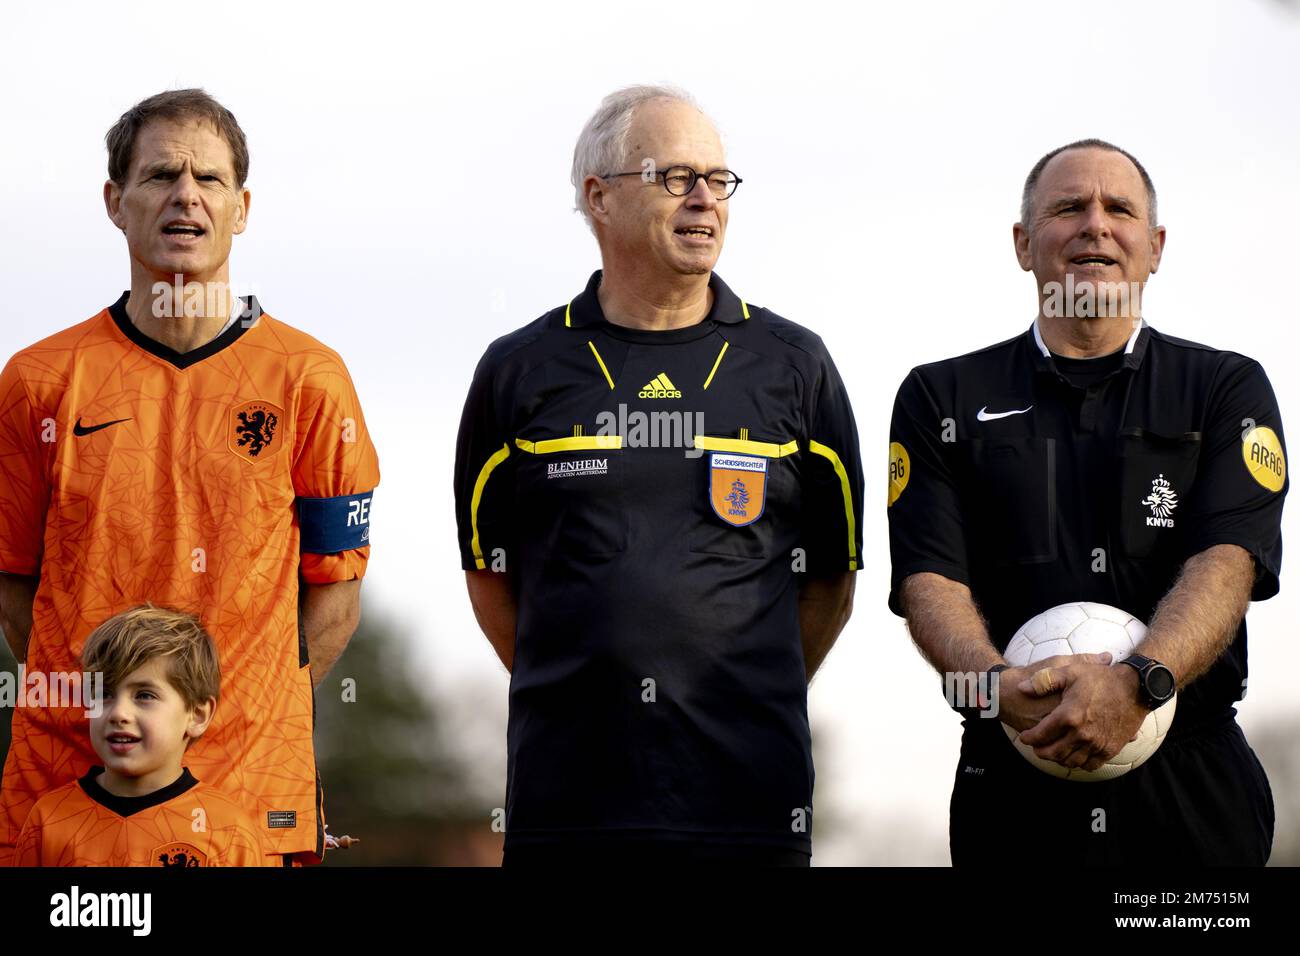 HAARLEM - Frank de Boer and referee Ruud Bossen prior to the traditional New Year's match between former Royal HFC players and ex-internationals. ANP SANDER KONING netherlands out - belgium out Stock Photo